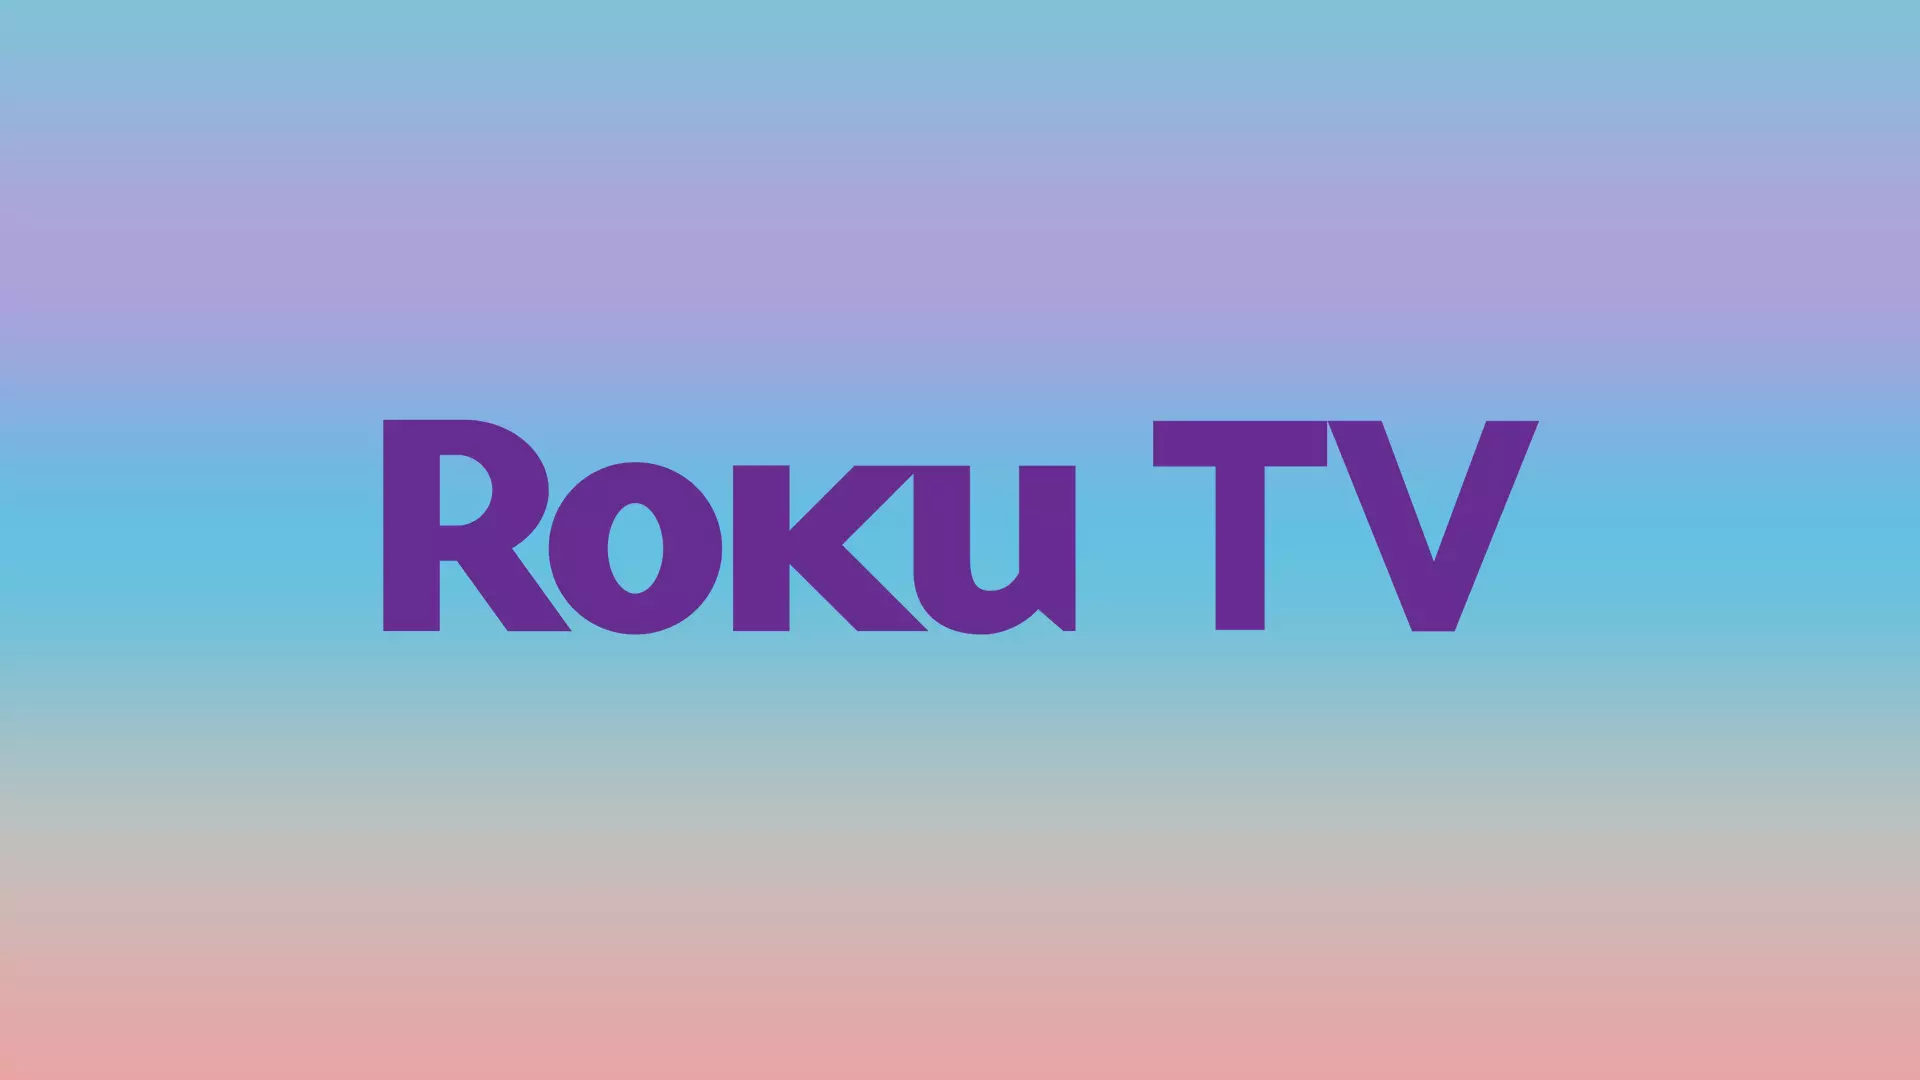 What is Roku TV and how does it work